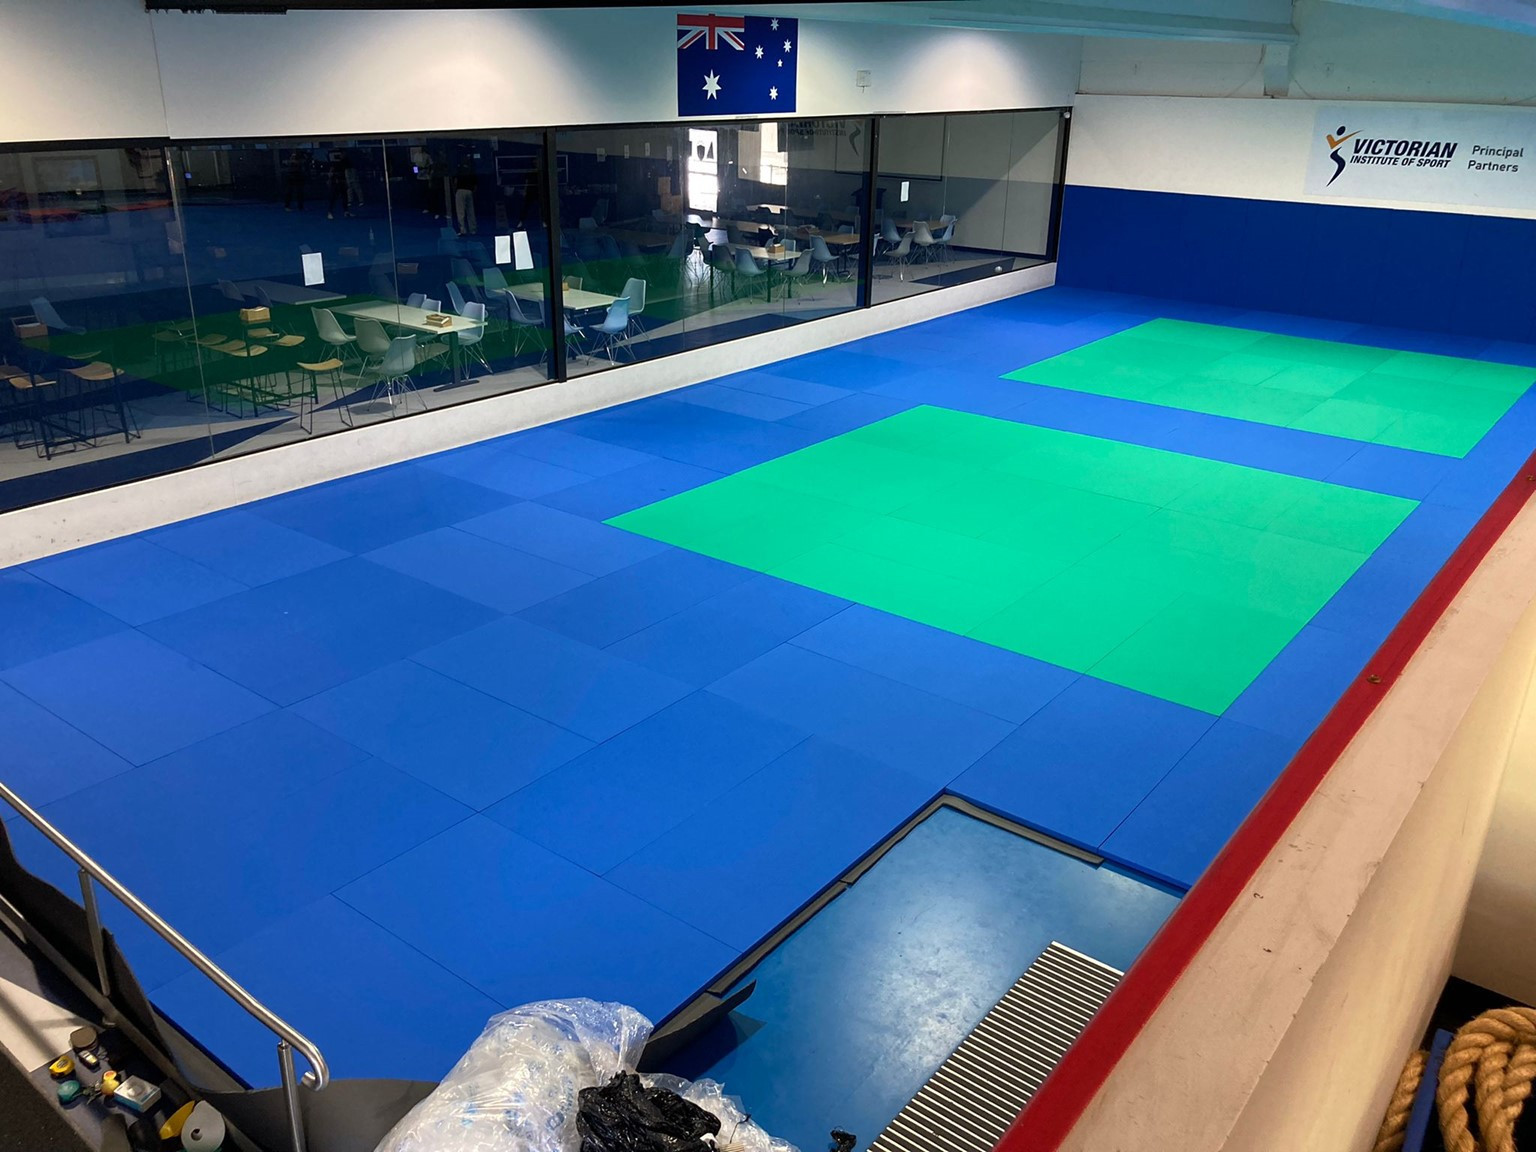 Boost for taekwondo and judo in Australia as National Performance Centre opens